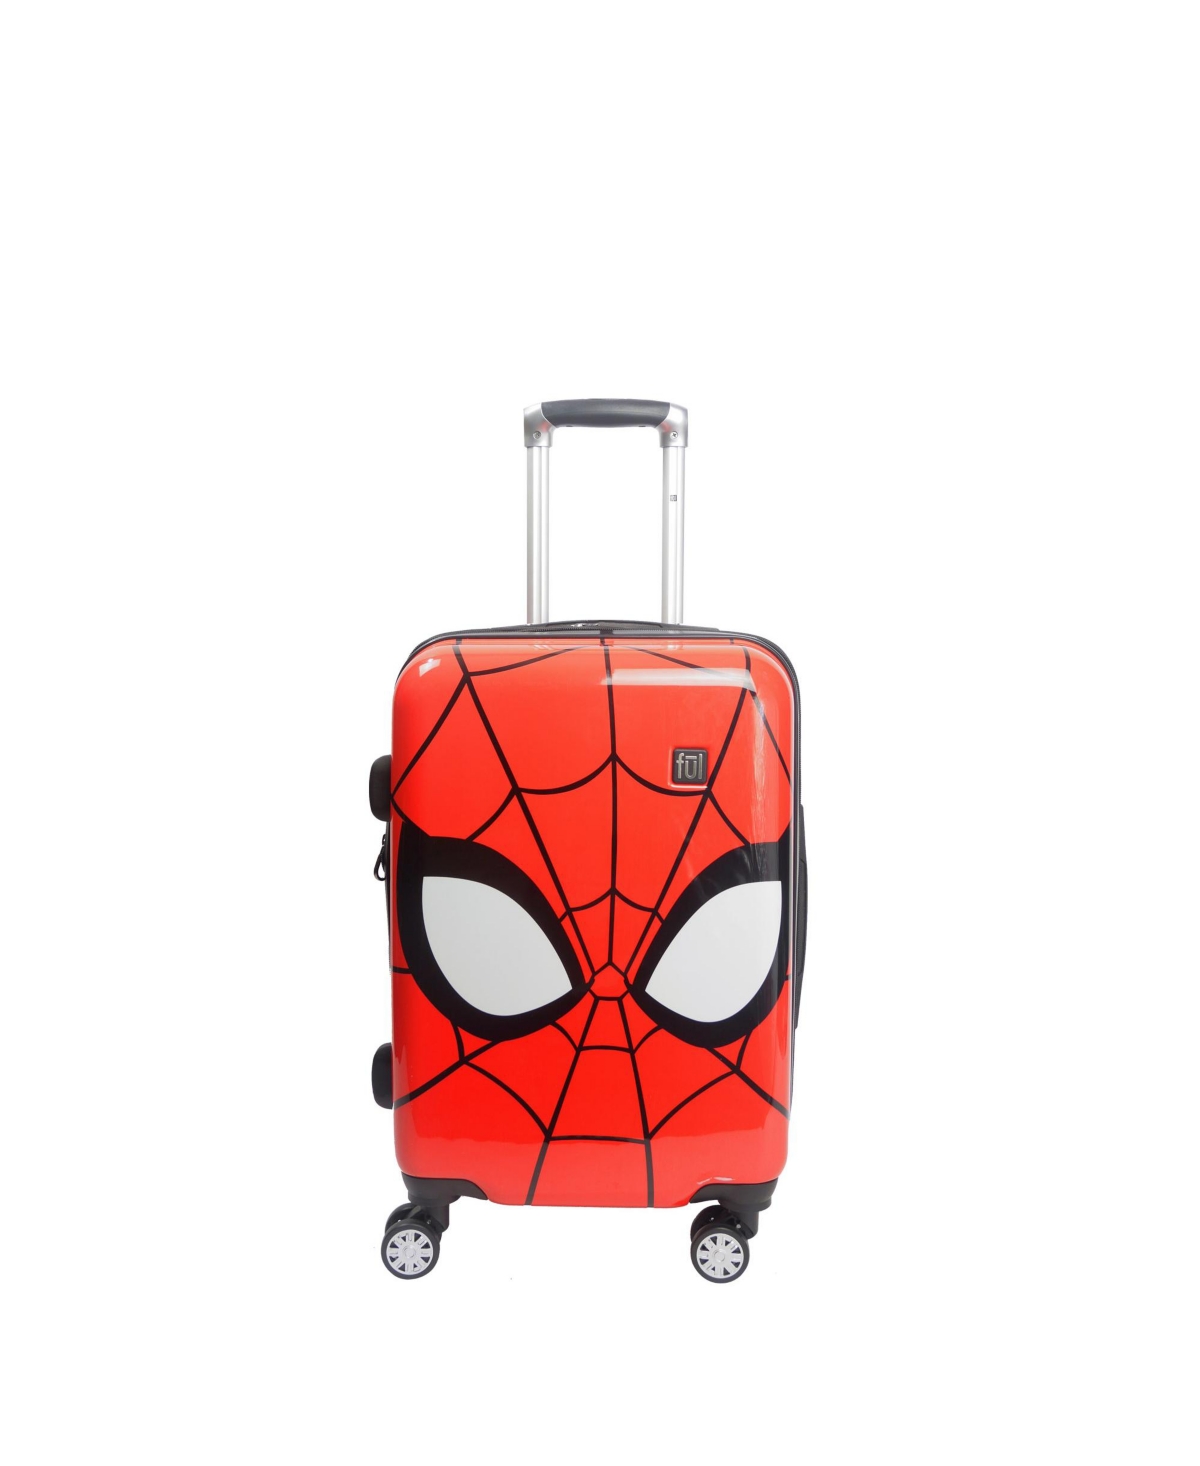 Marvel Spiderman 21" Hard Sided Check in Luggage - Red